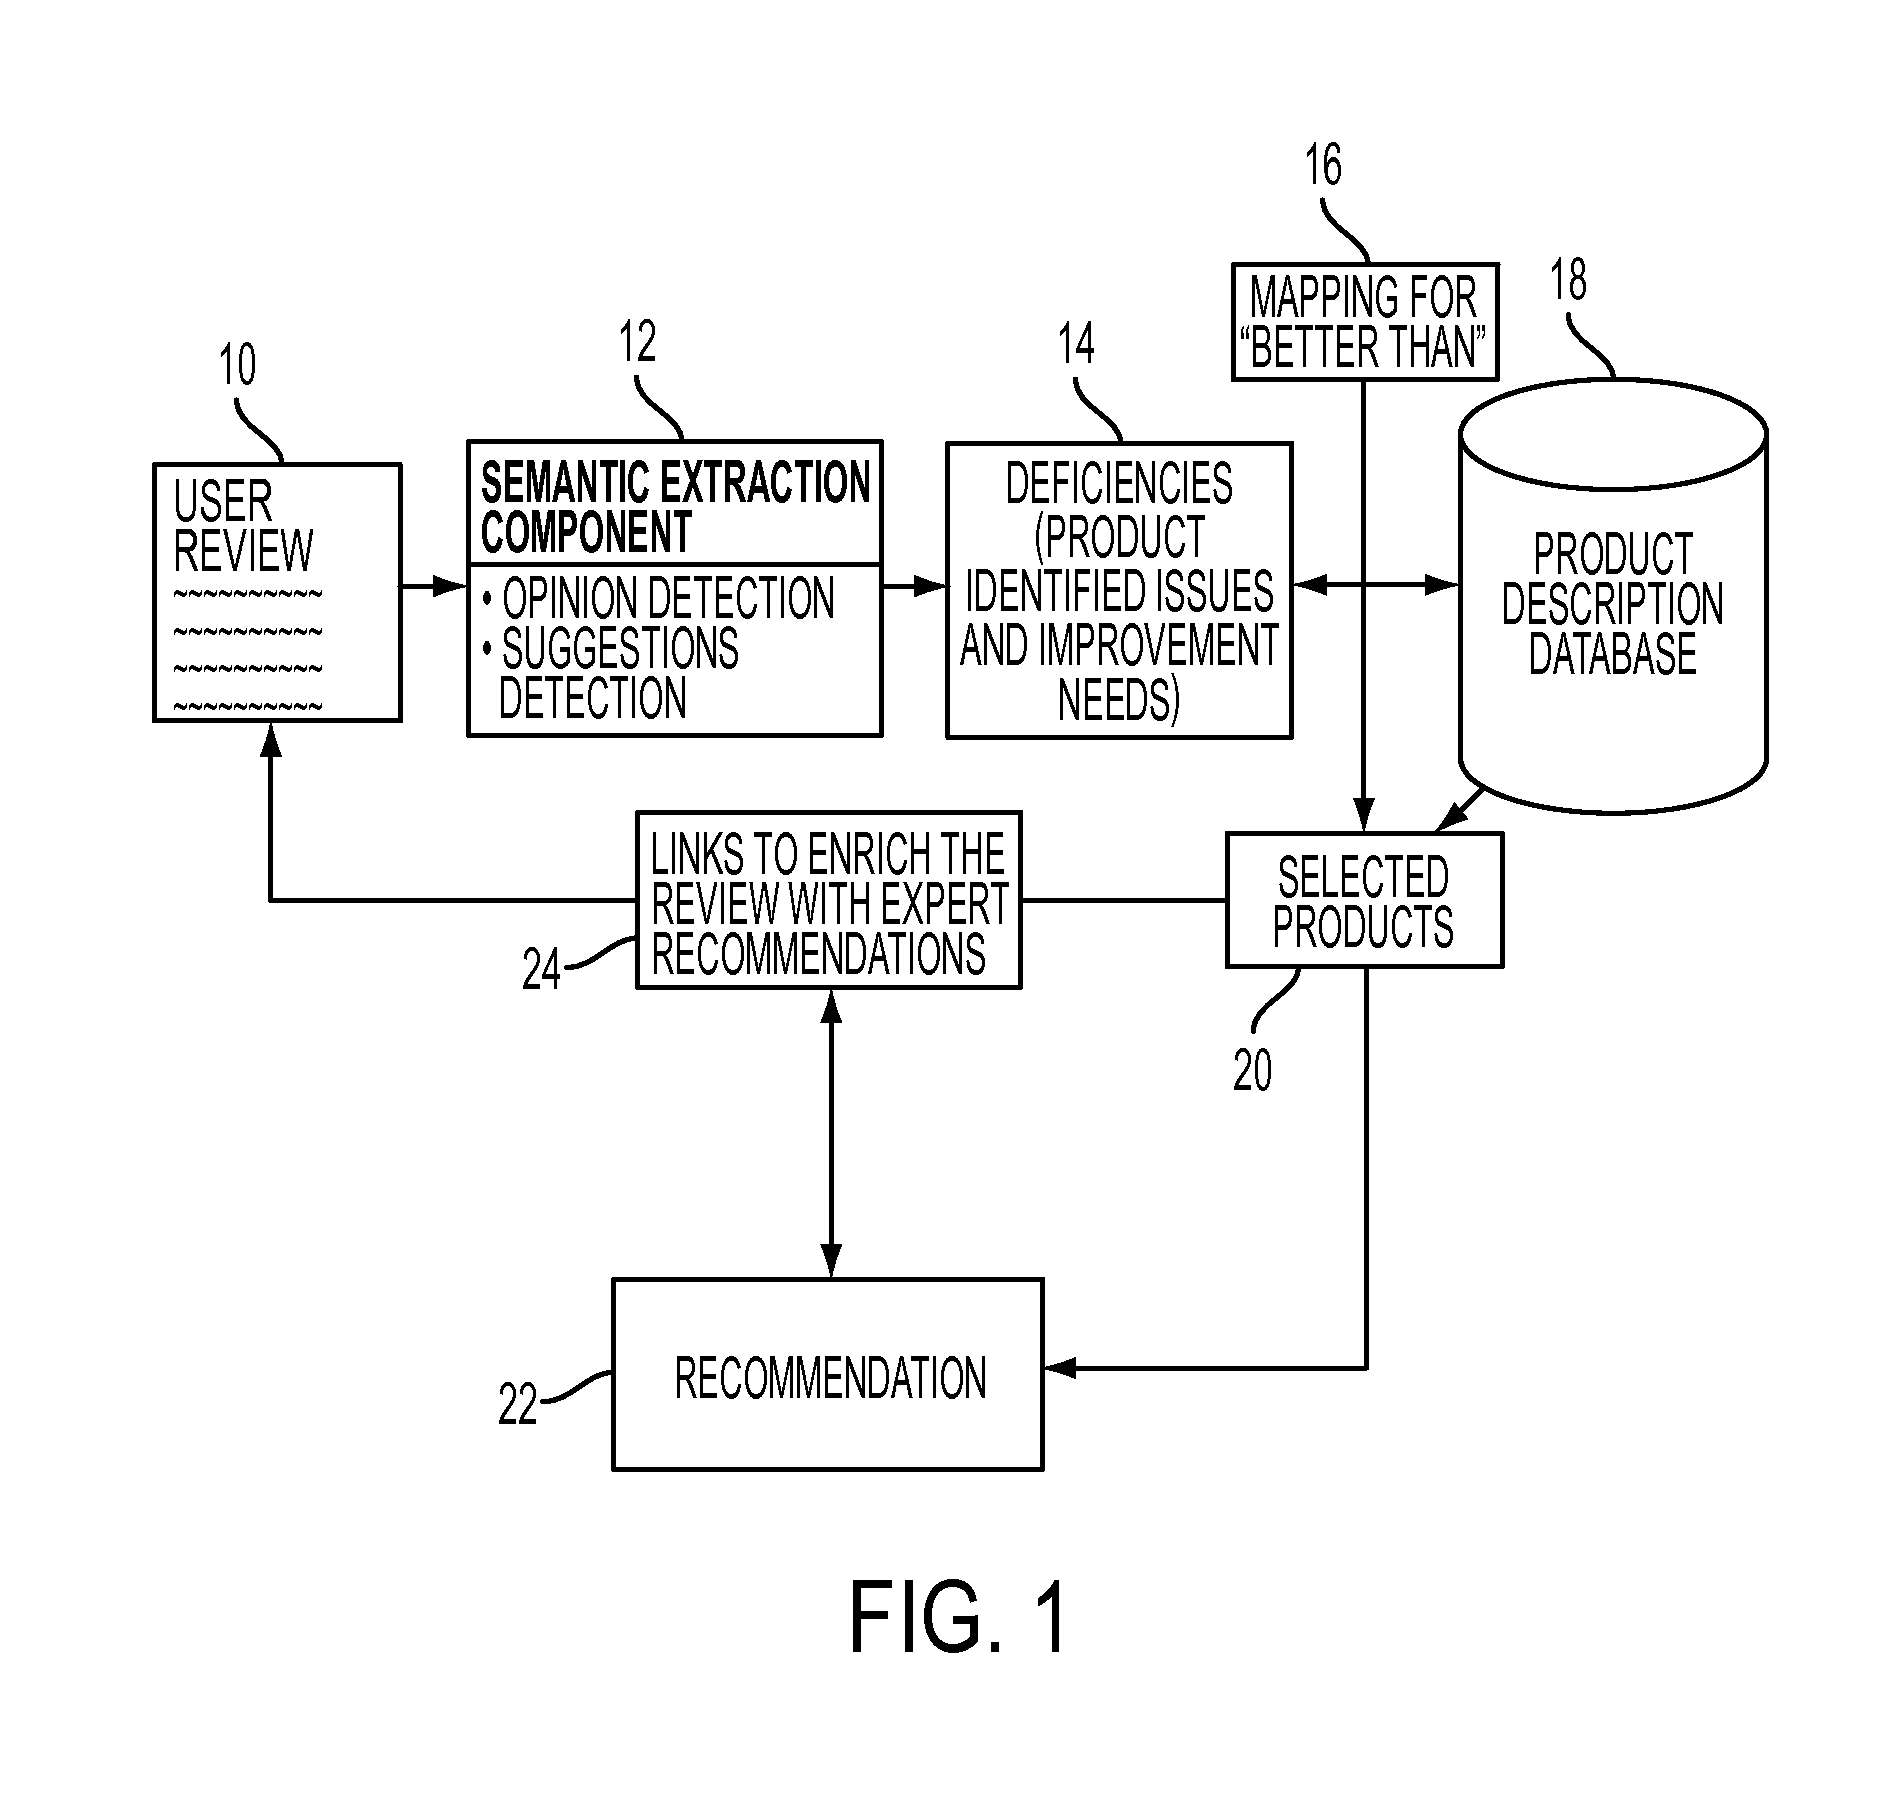 System and method for providing recommendations based on information extracted from reviewers' comments